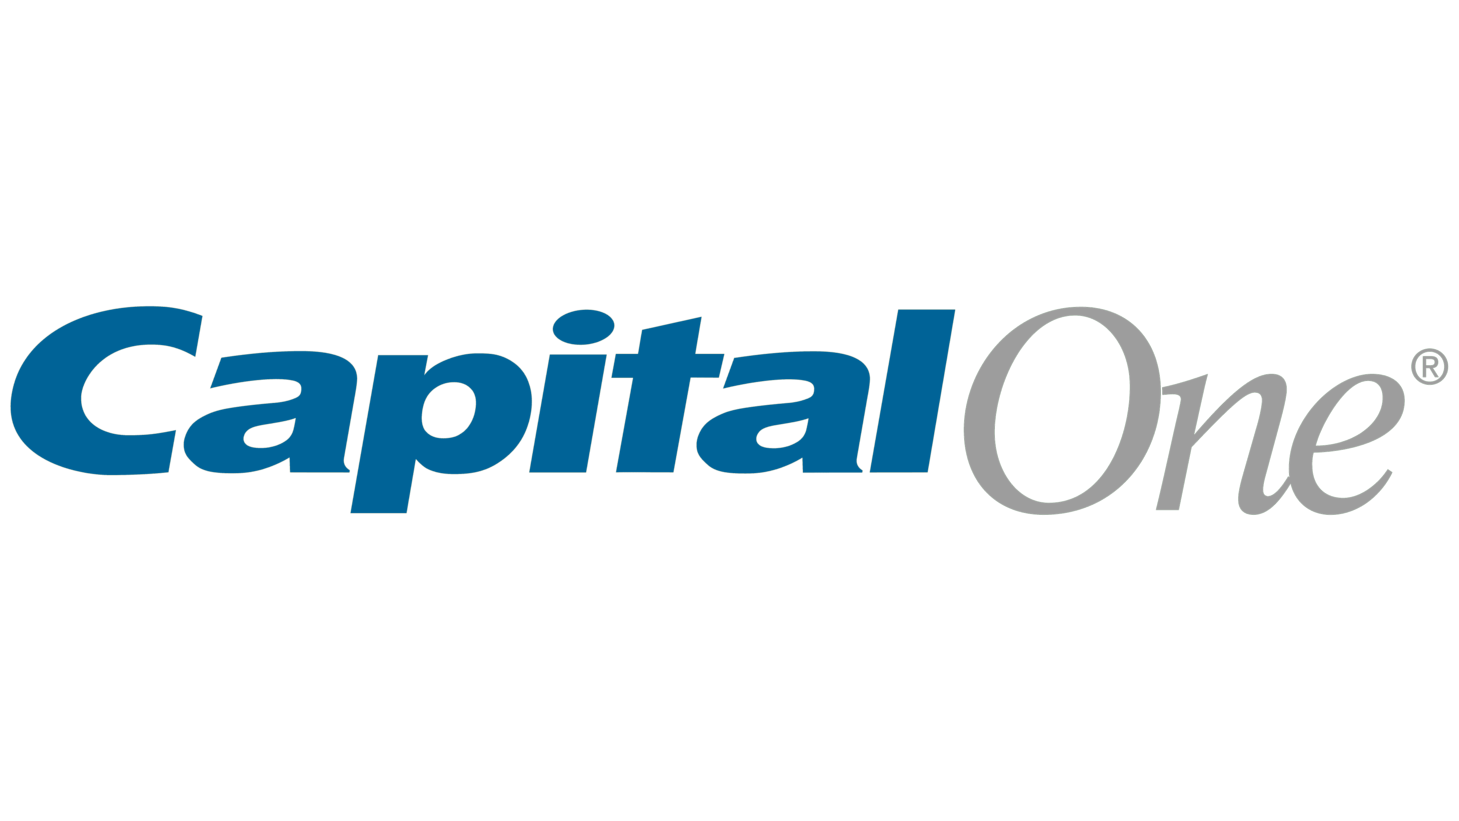 Capital one sign 1994 2008